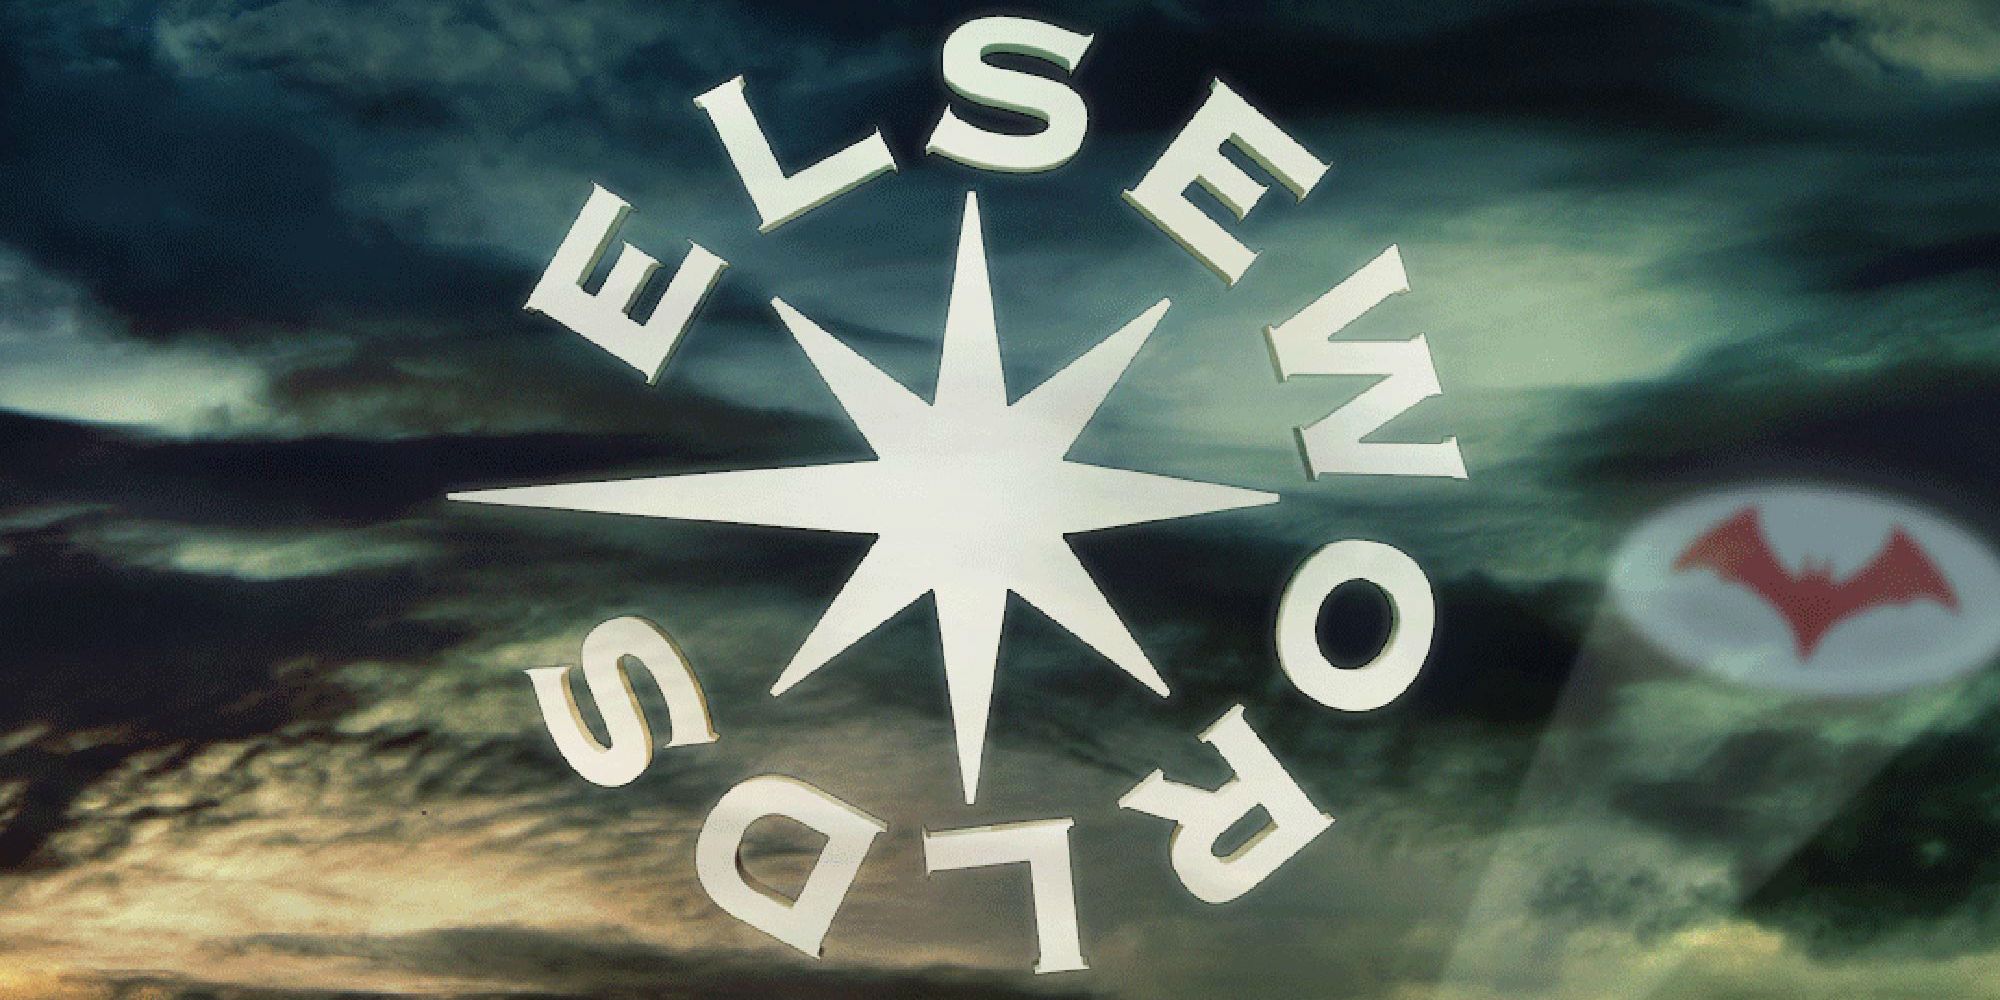 Elseworlds Everything You Need To Know About The Arrowverse Crossover